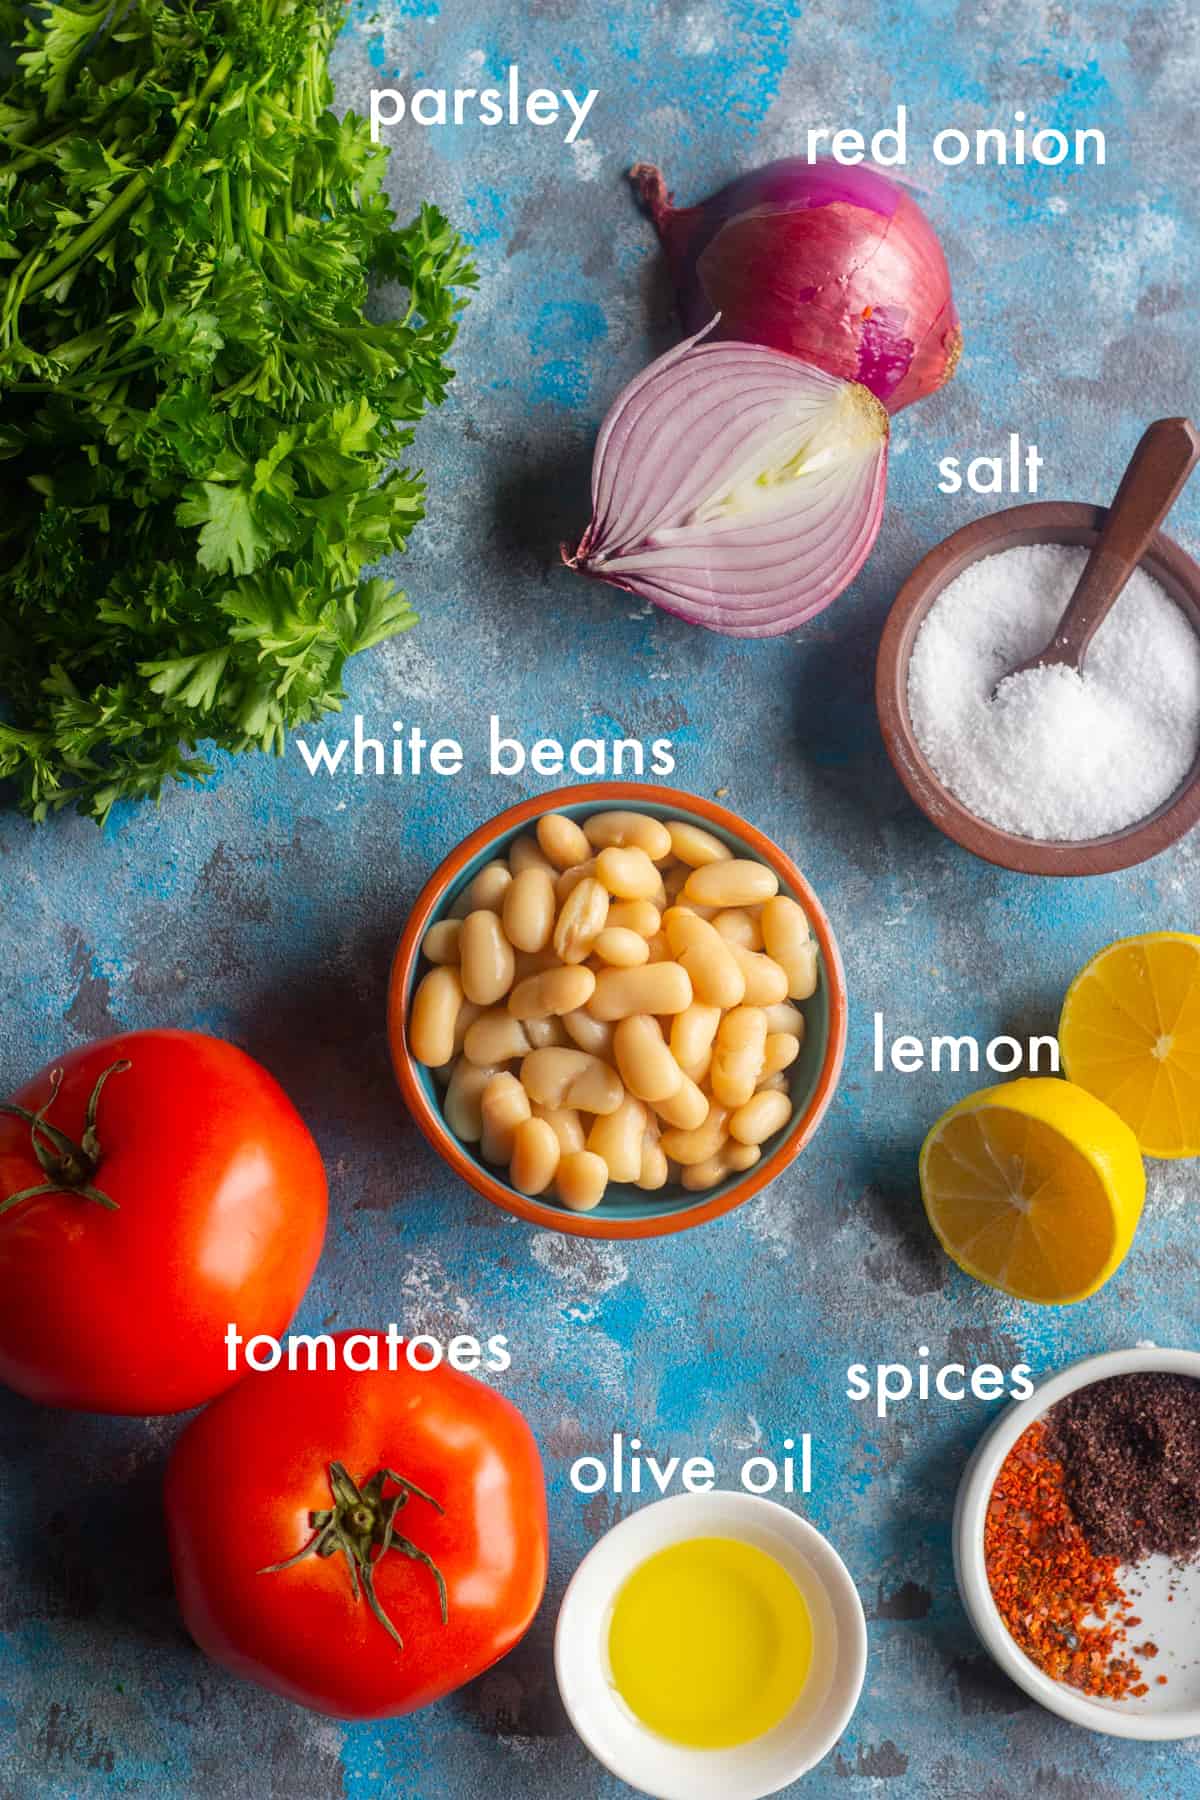 To make this salad you need white beans, parsley, red onion, tomatoes, olive oil, salt and pepper and sumac. 